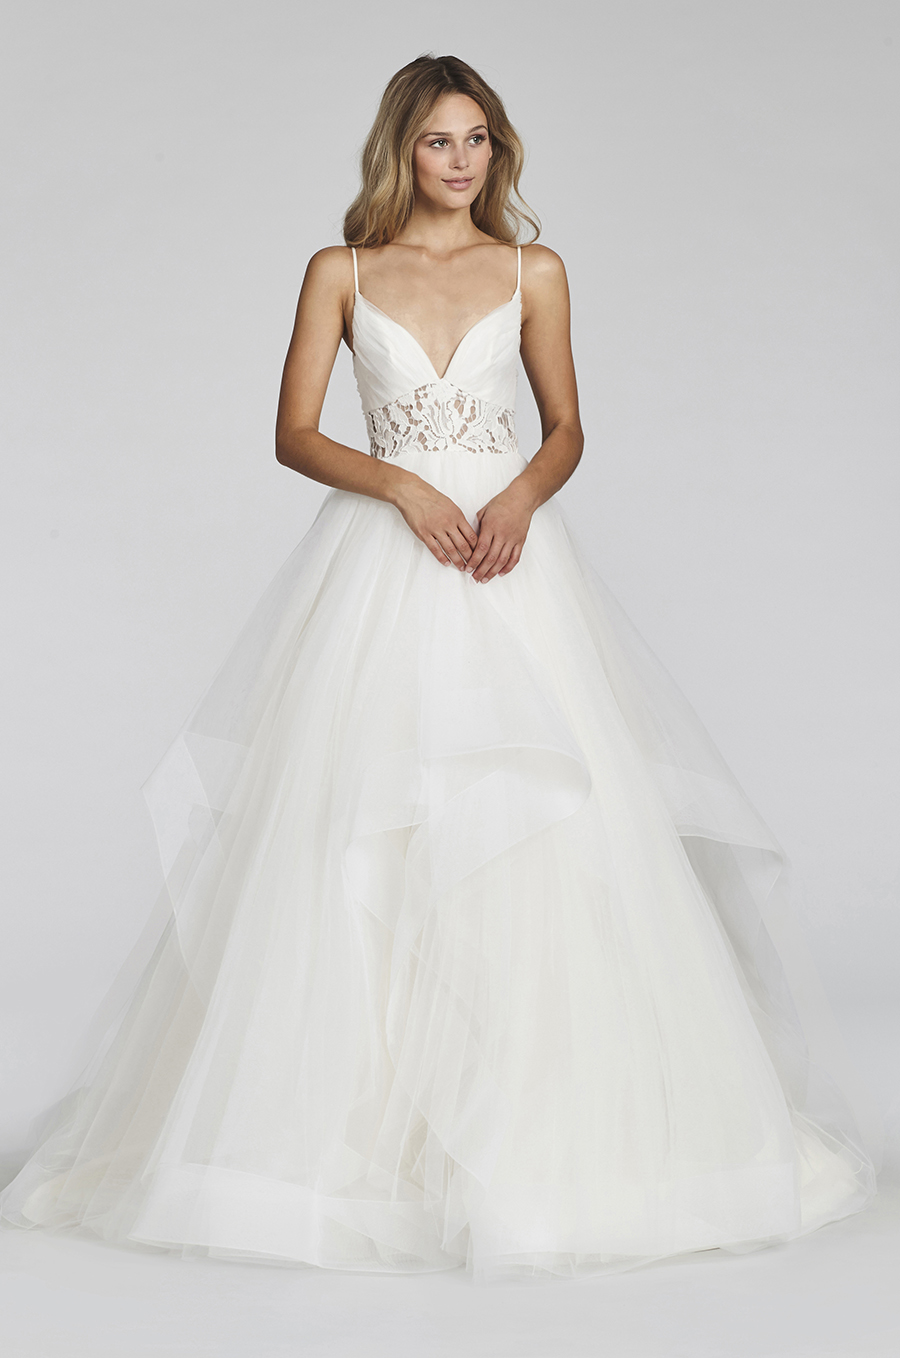 Blush by Hayley Paige Spring 2019 Bridal  Gown  Collection 